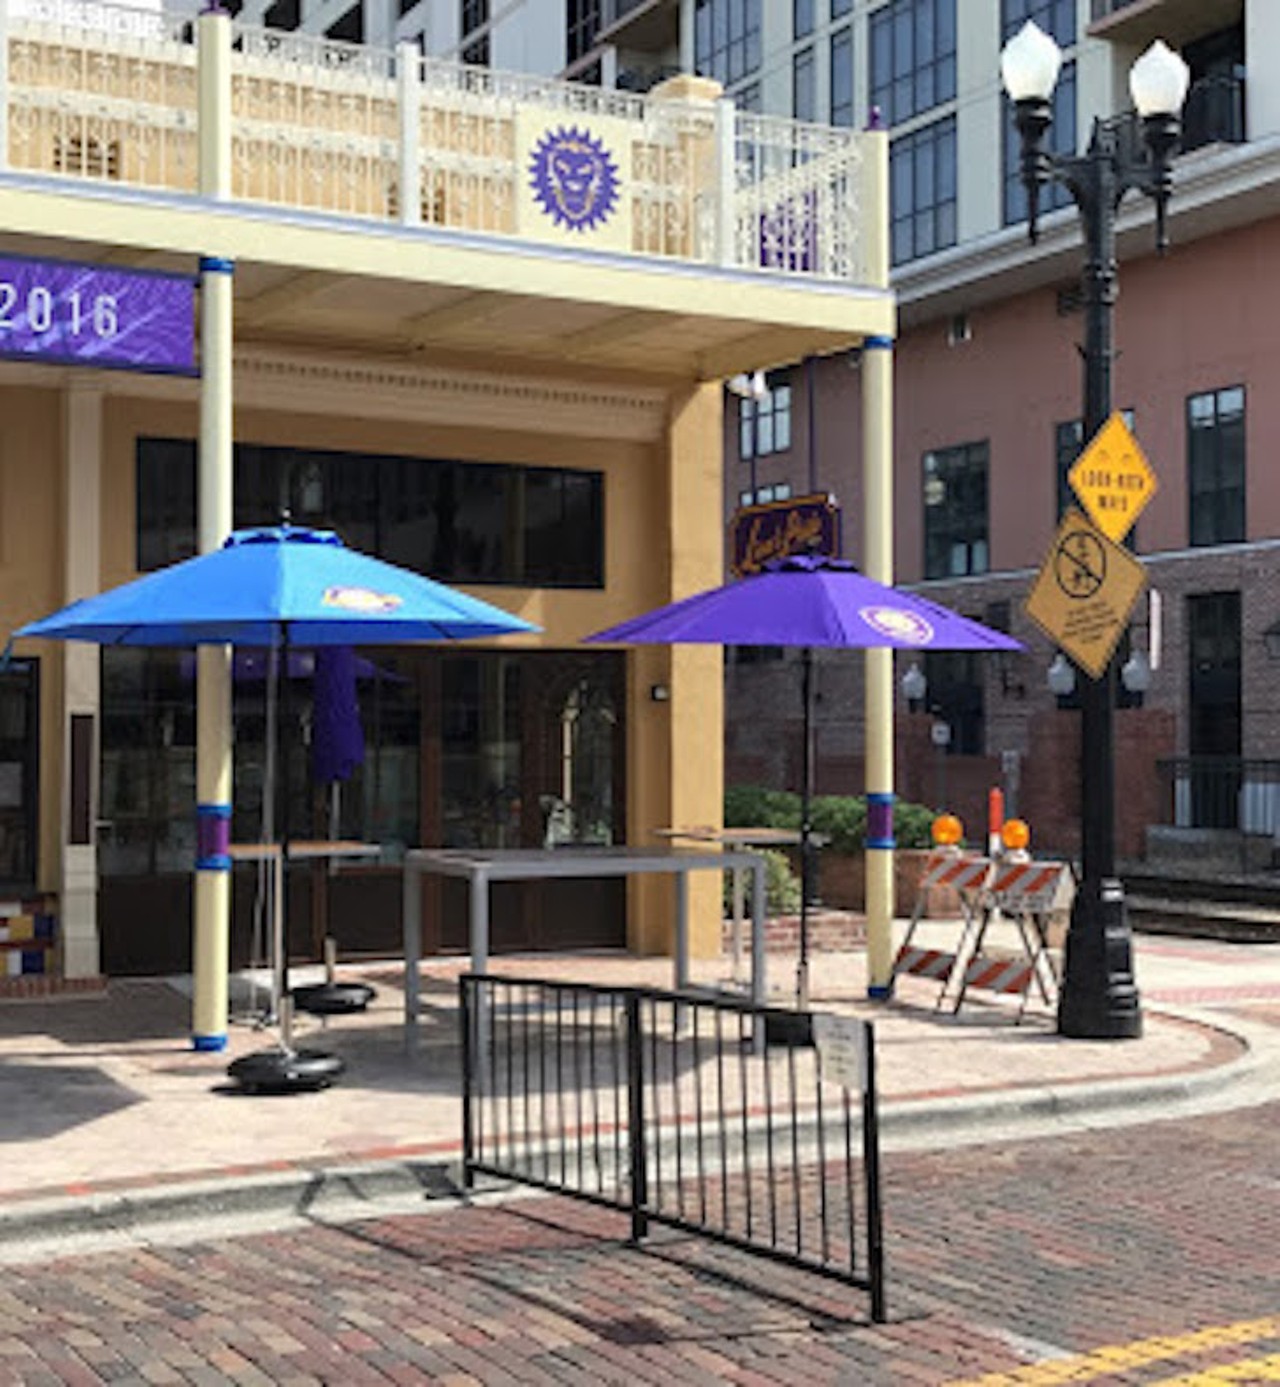 Lion&#146;s Pride
123 W. Church St.
The Orlando City SC-themed joint downtown boasts a rich soccer atmosphere and a variety of food specials.
Photo via lionsprideorlando.com